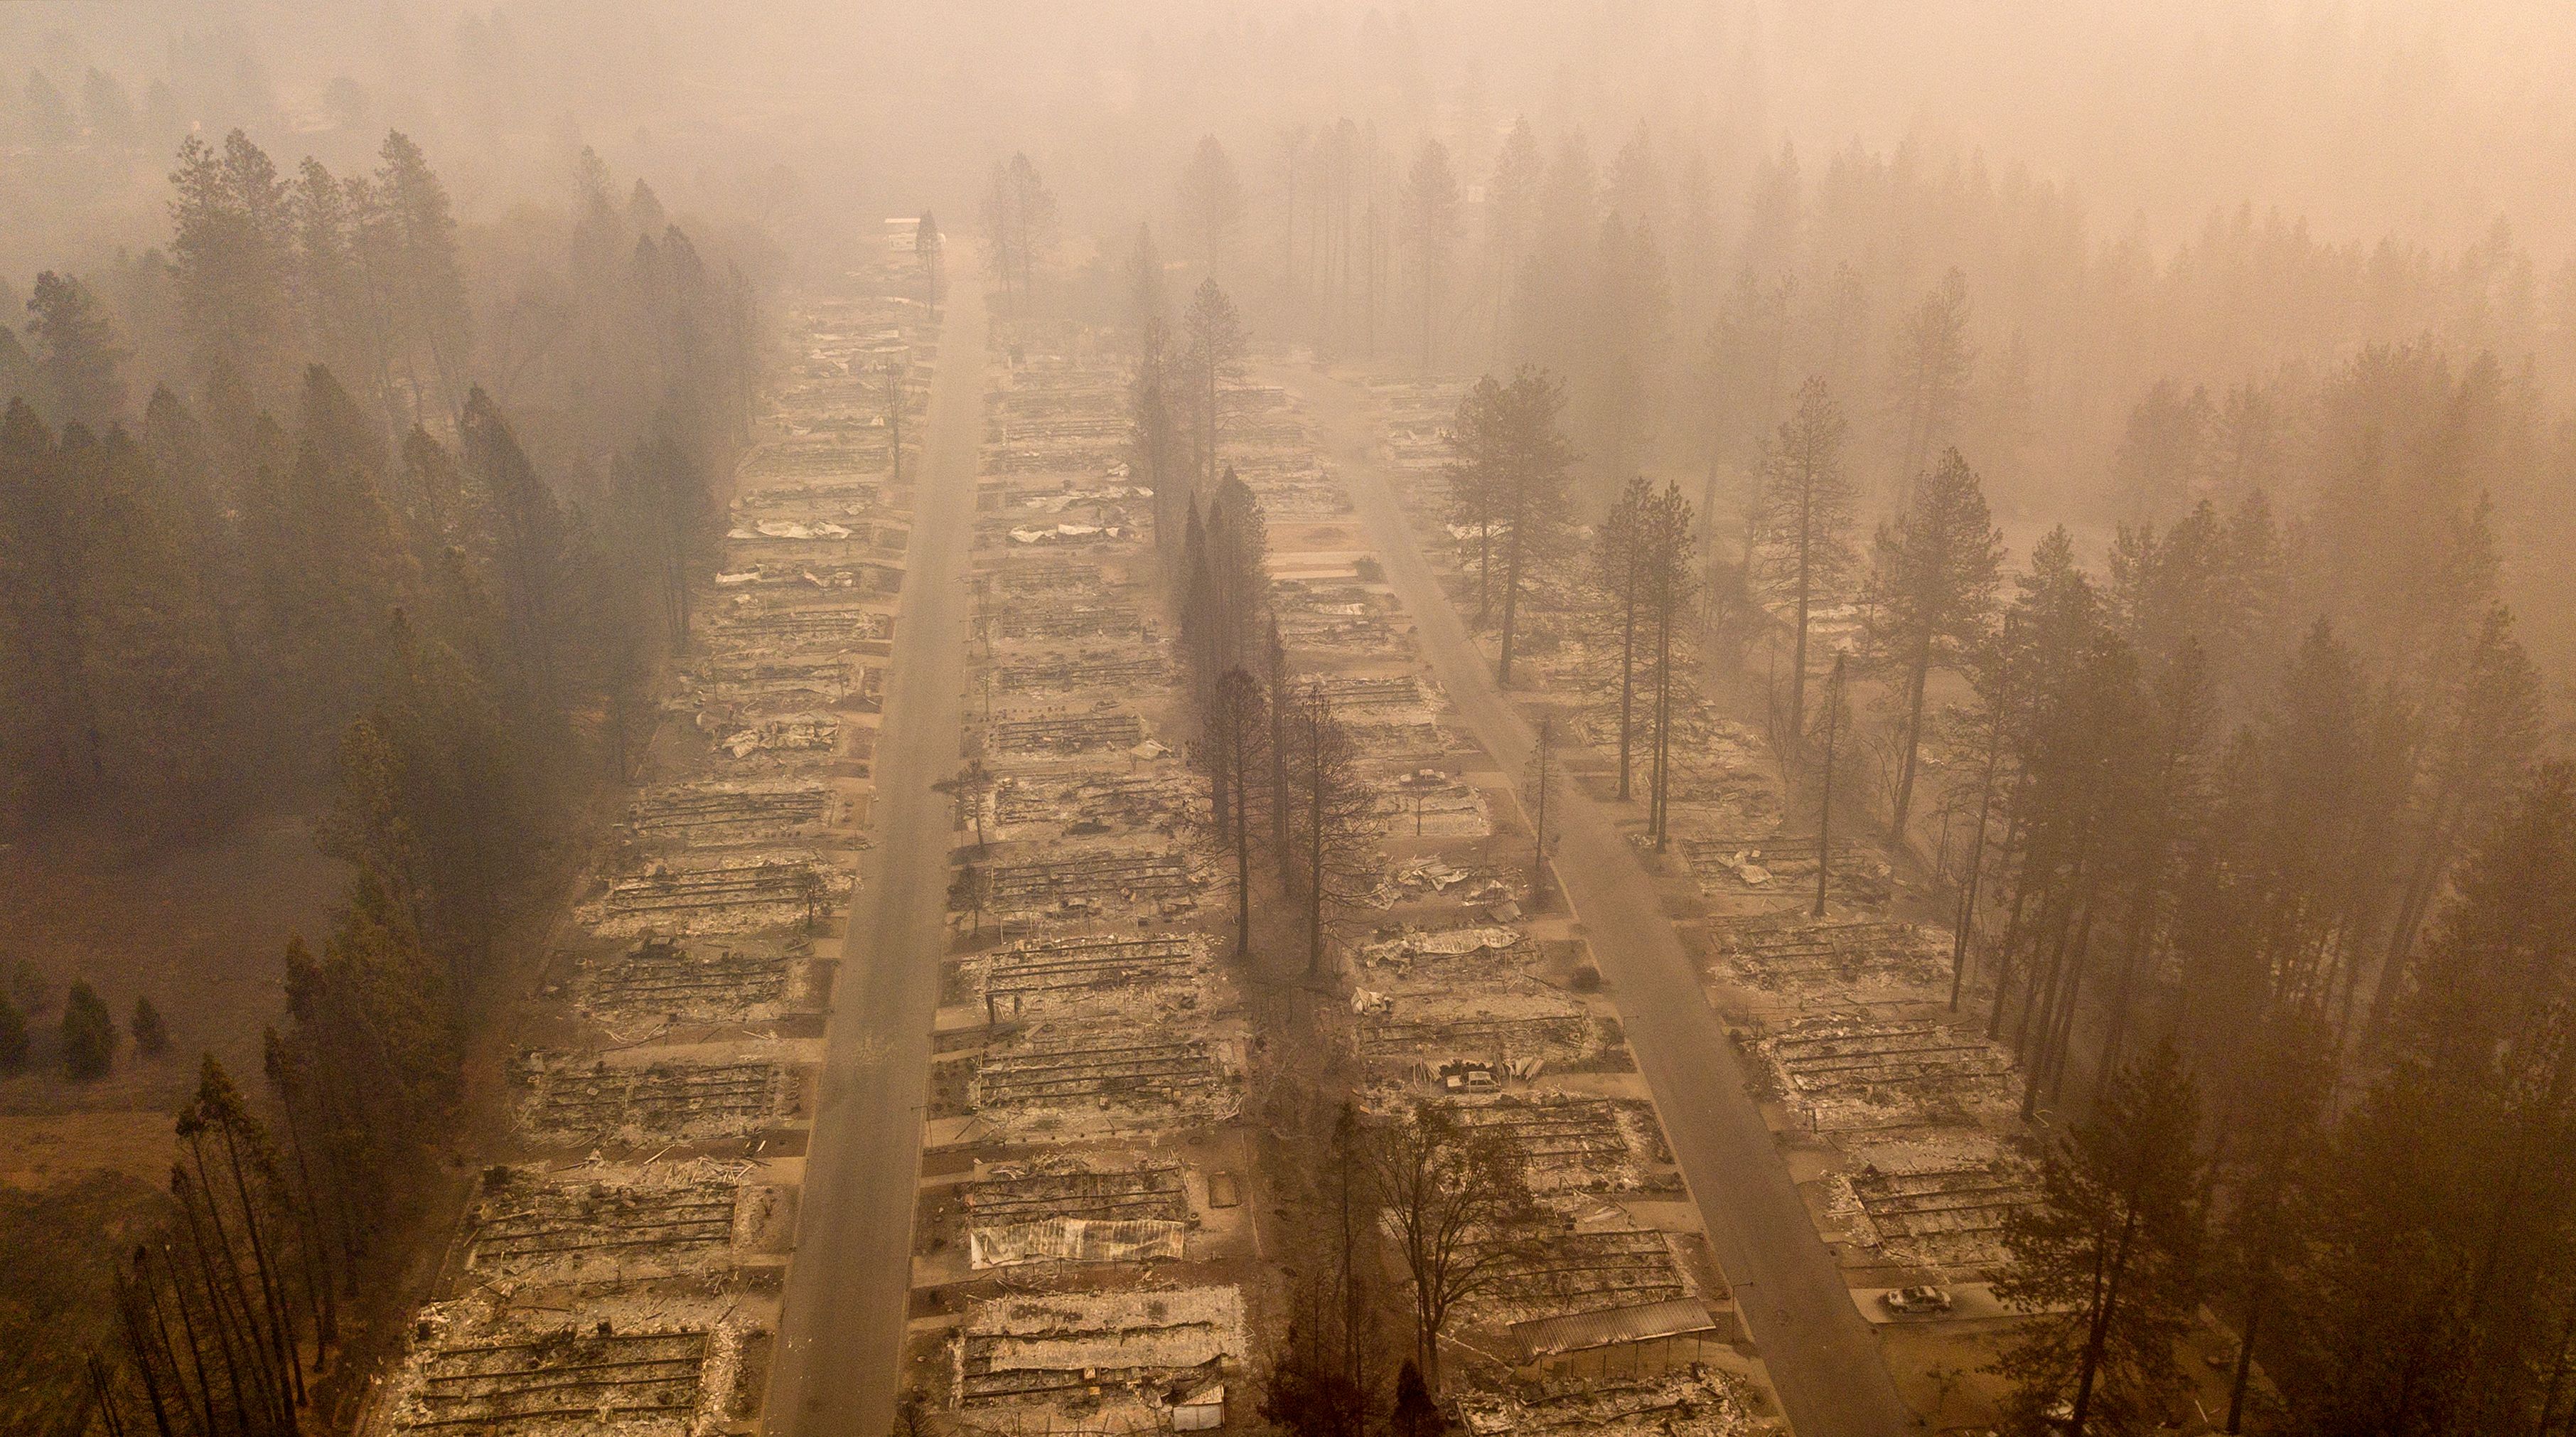 Aftermath of Paradise, California after the Camp Fire. r/MorbidReality